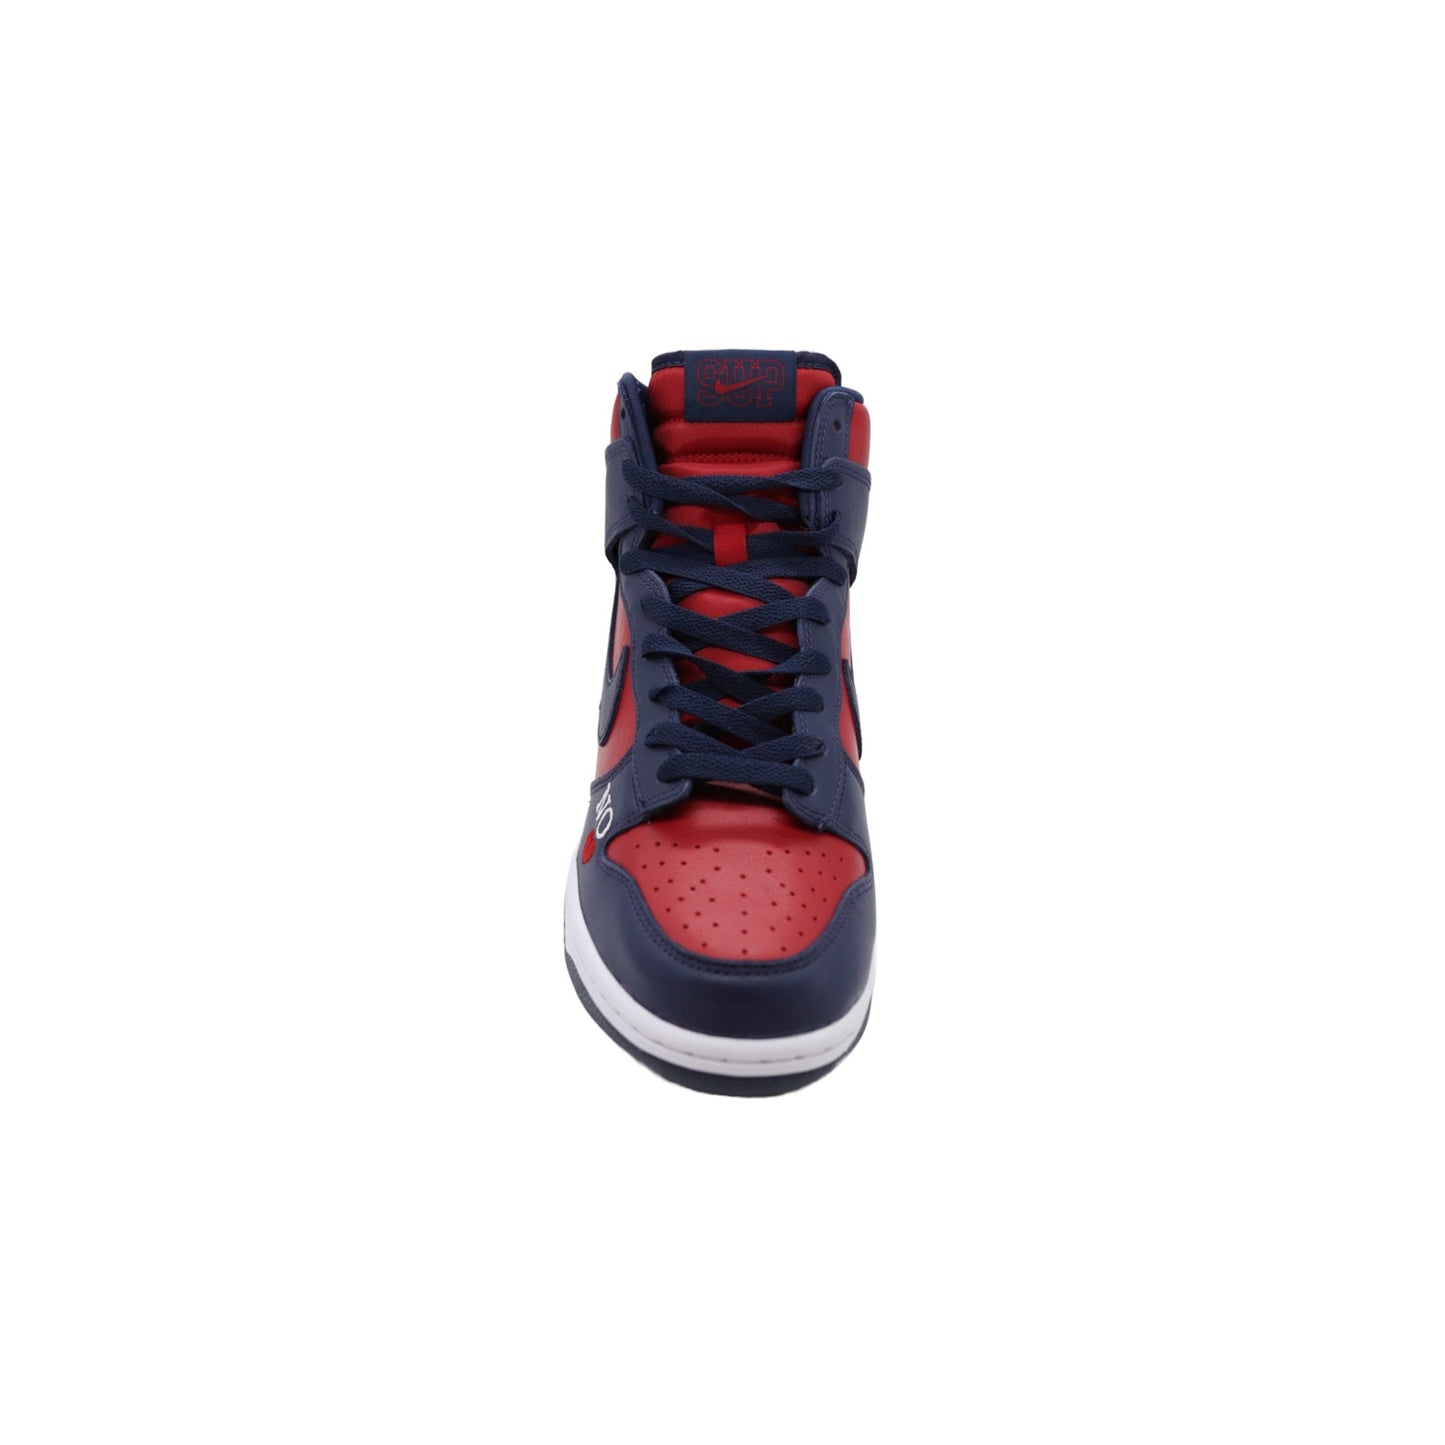 Nike Dunk High SB, Supreme By Any Means- Red Navy